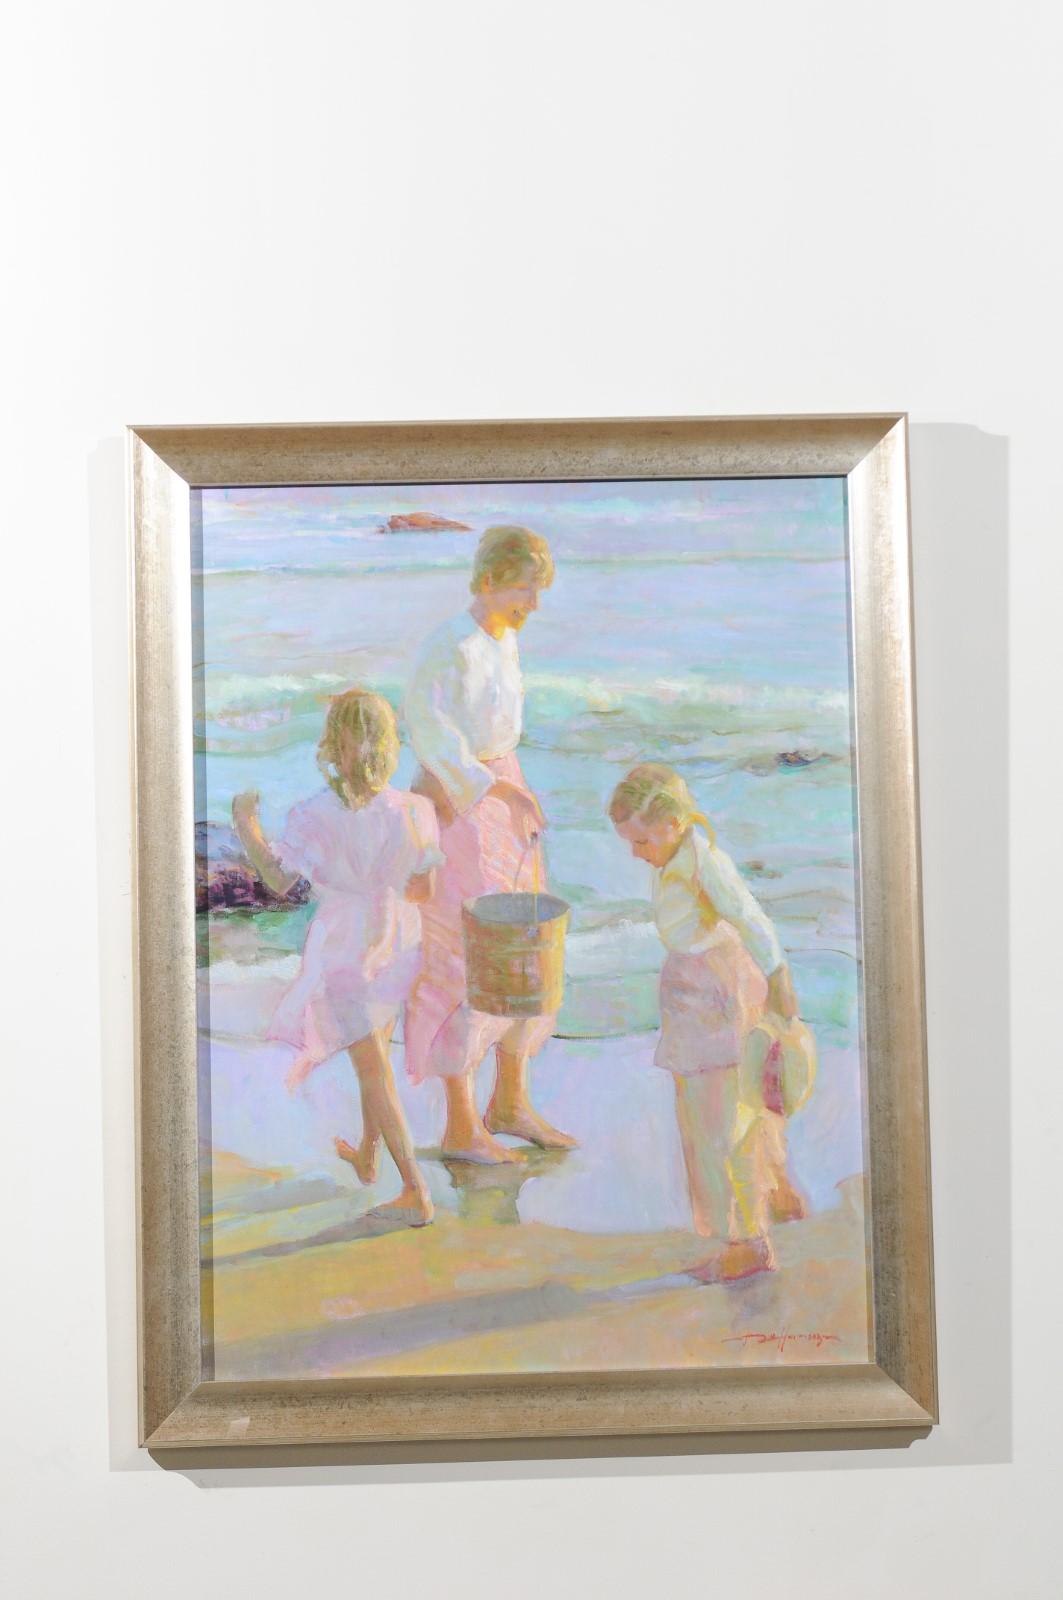 Gilt Daughters by Don Hatfield, Vertical Contemporary Framed Beach Scene Painting